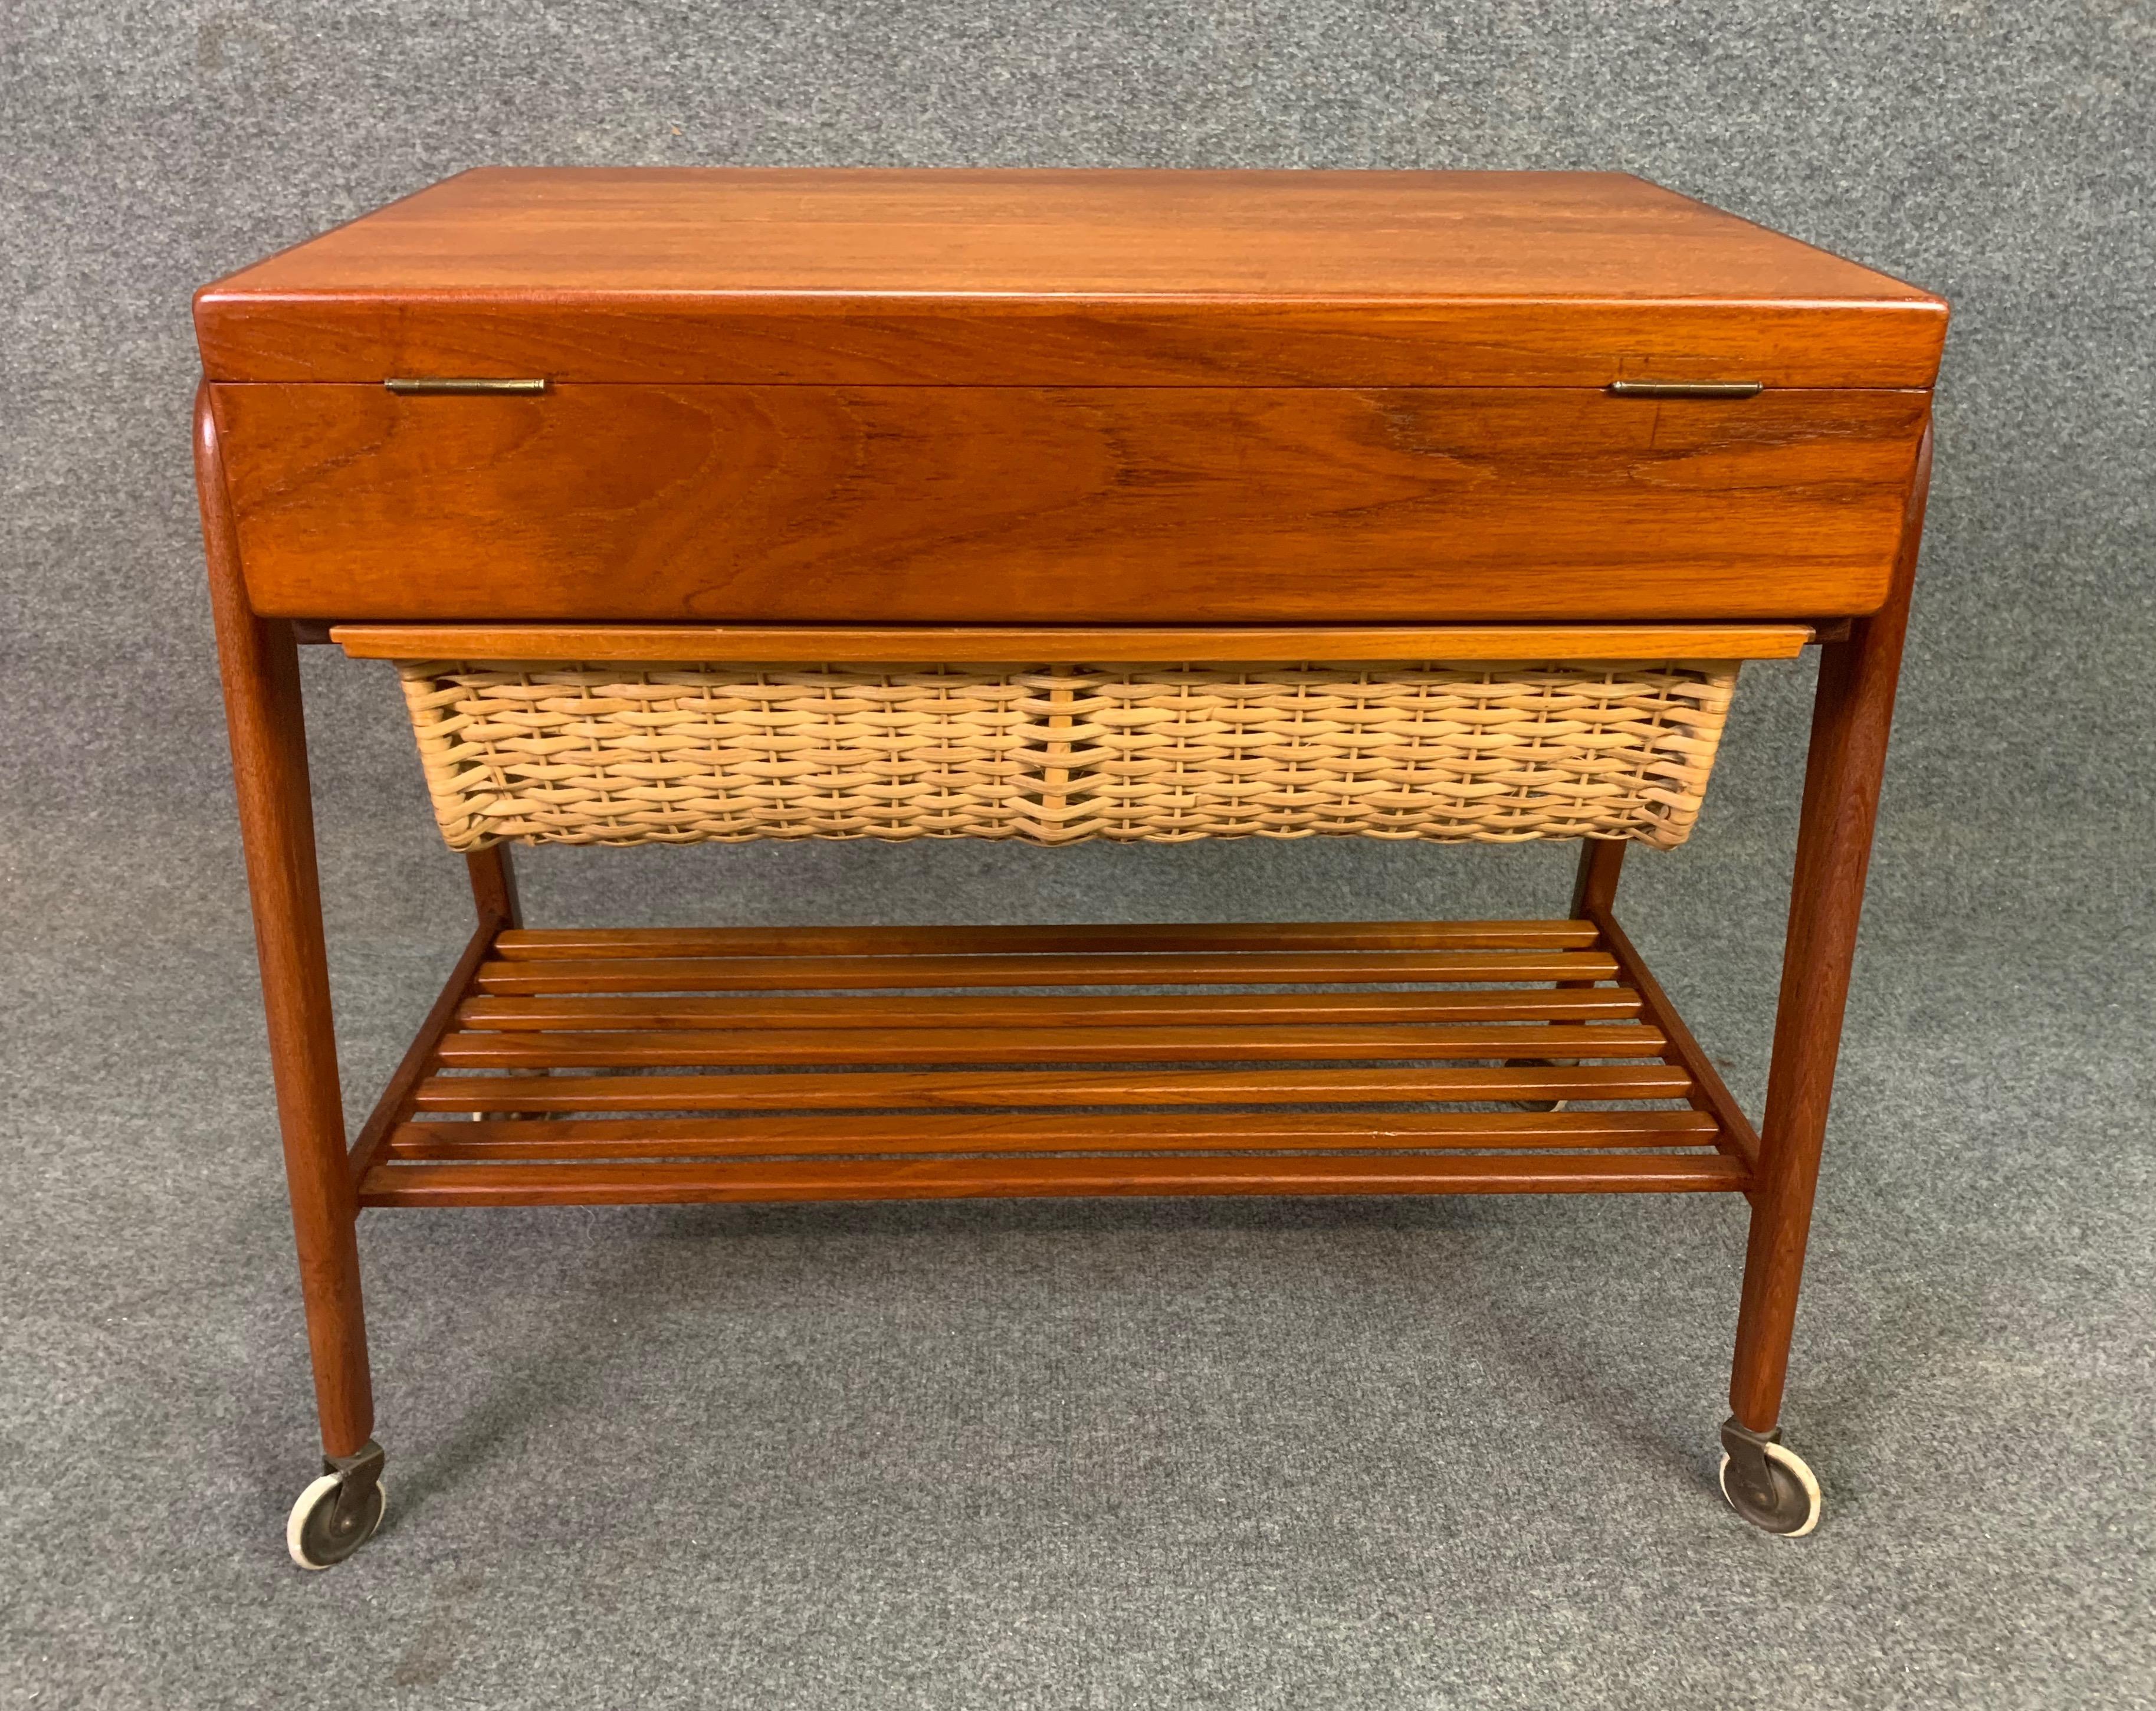 Here is a beautiful and rare Scandinavian Modern teak sewing cart designed by Poul Dinesen in Denmark in the 1960s.
This versatile piece, recently imported from Copenhagen to California before its refinishing, features a vibrant wood grain, a lift